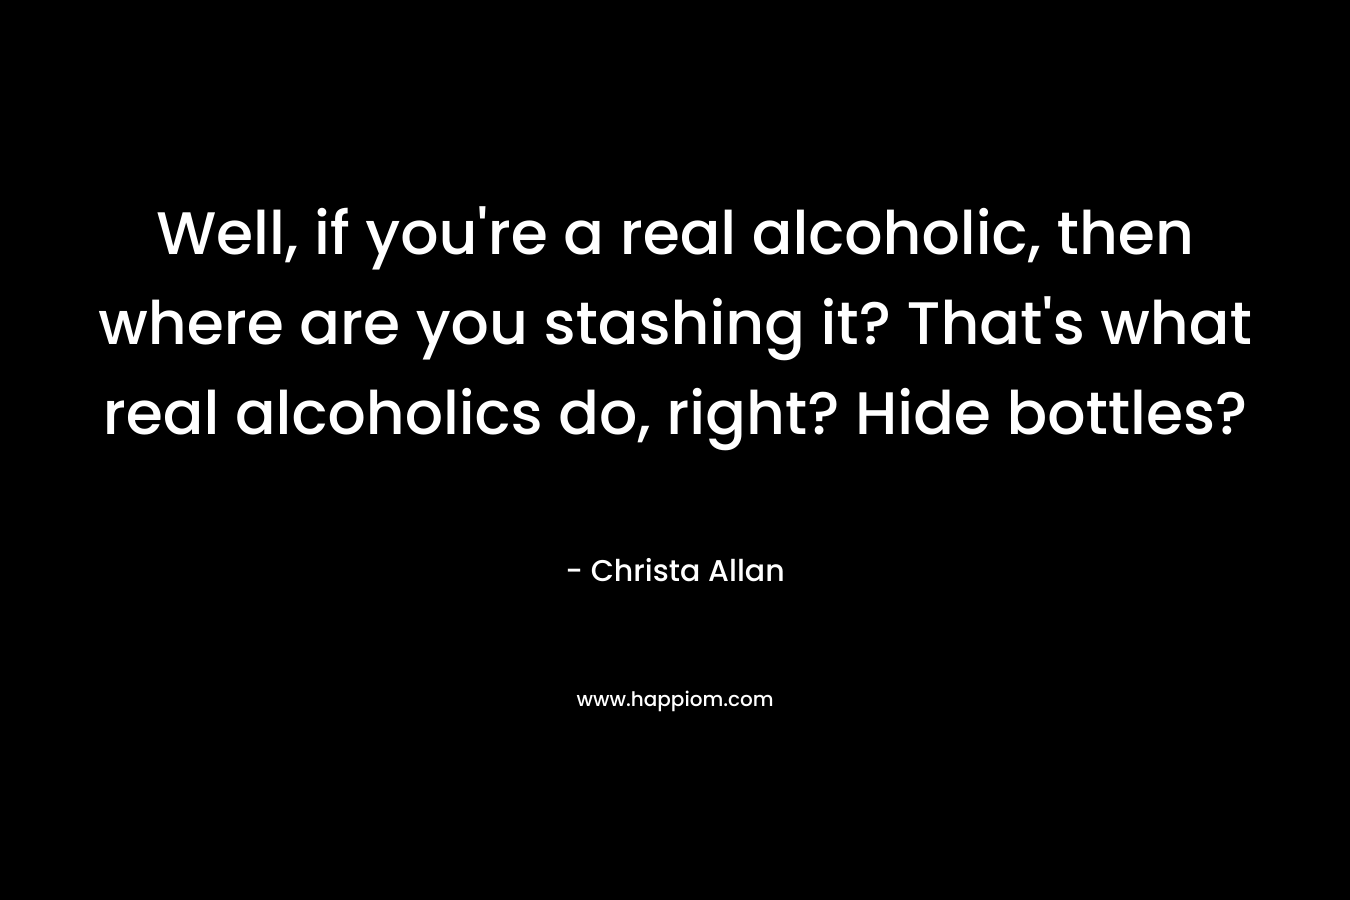 Well, if you’re a real alcoholic, then where are you stashing it? That’s what real alcoholics do, right? Hide bottles? – Christa Allan